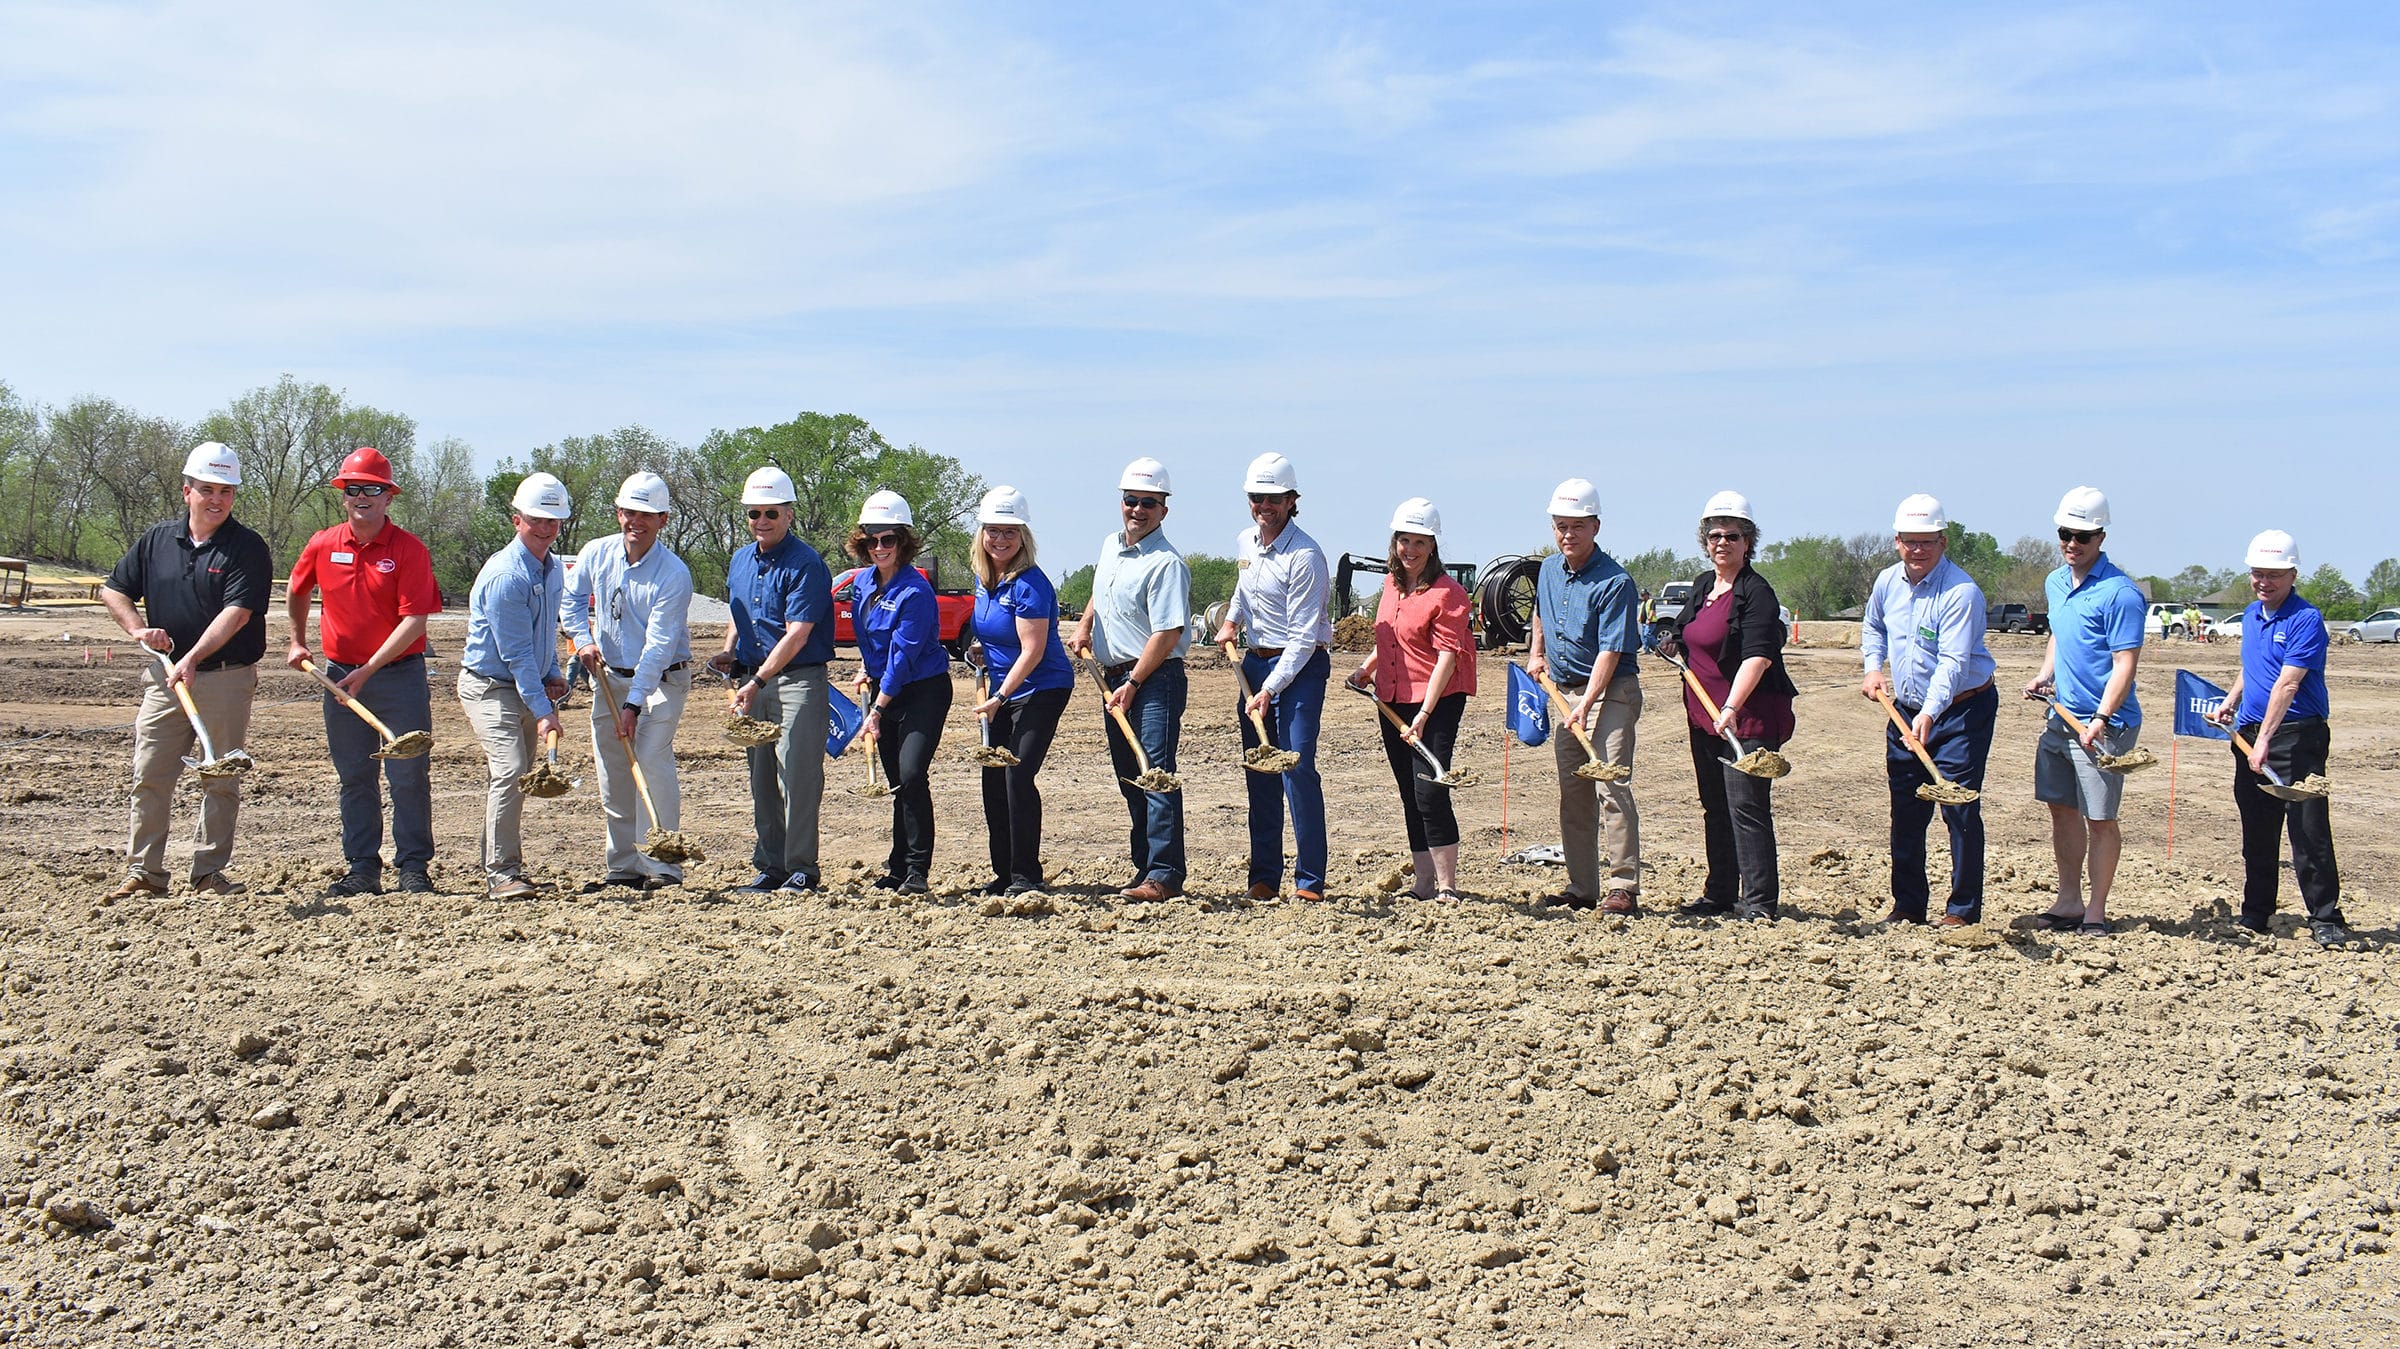 Earlier in the spring, Hillcrest Health Services broke ground on what will be the first full Continuing Care Retirement Community in Gretna.